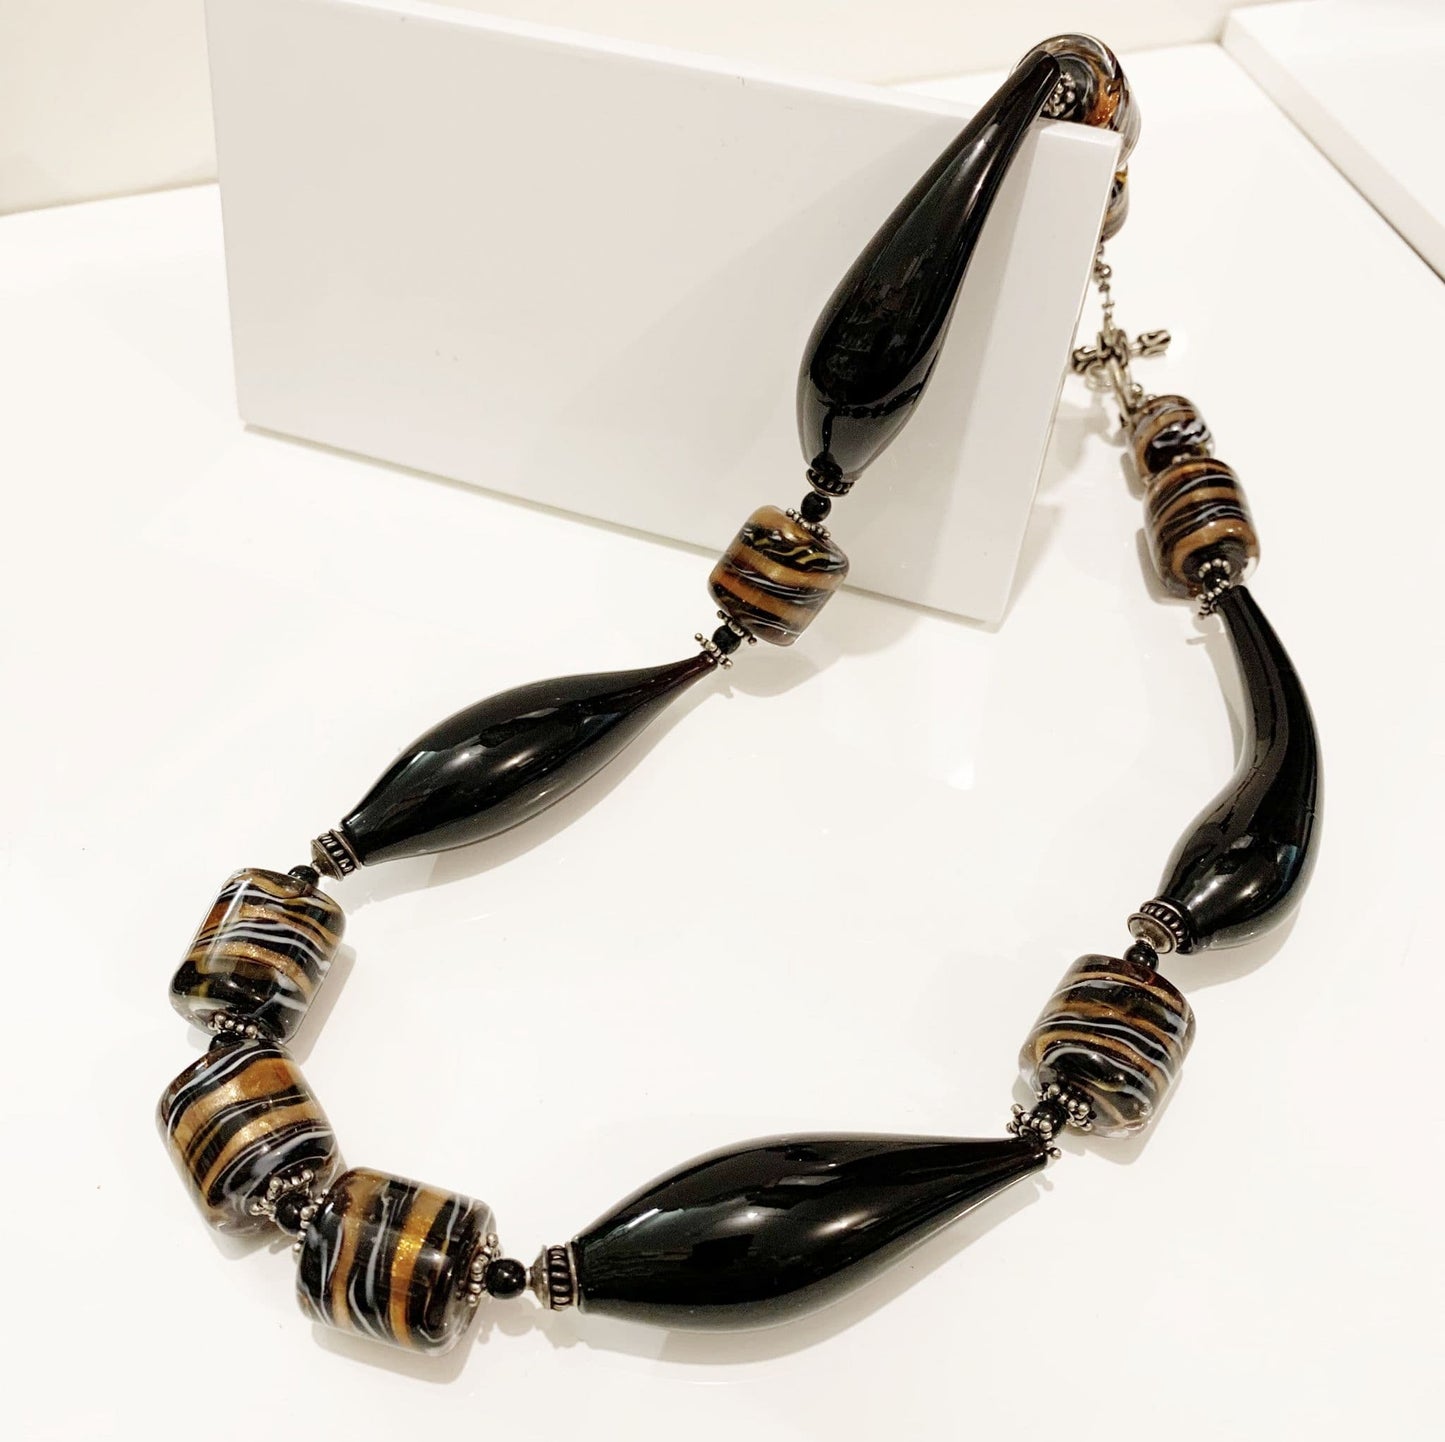 Spectacular Large Black Hand Blown Murano Glass Necklace